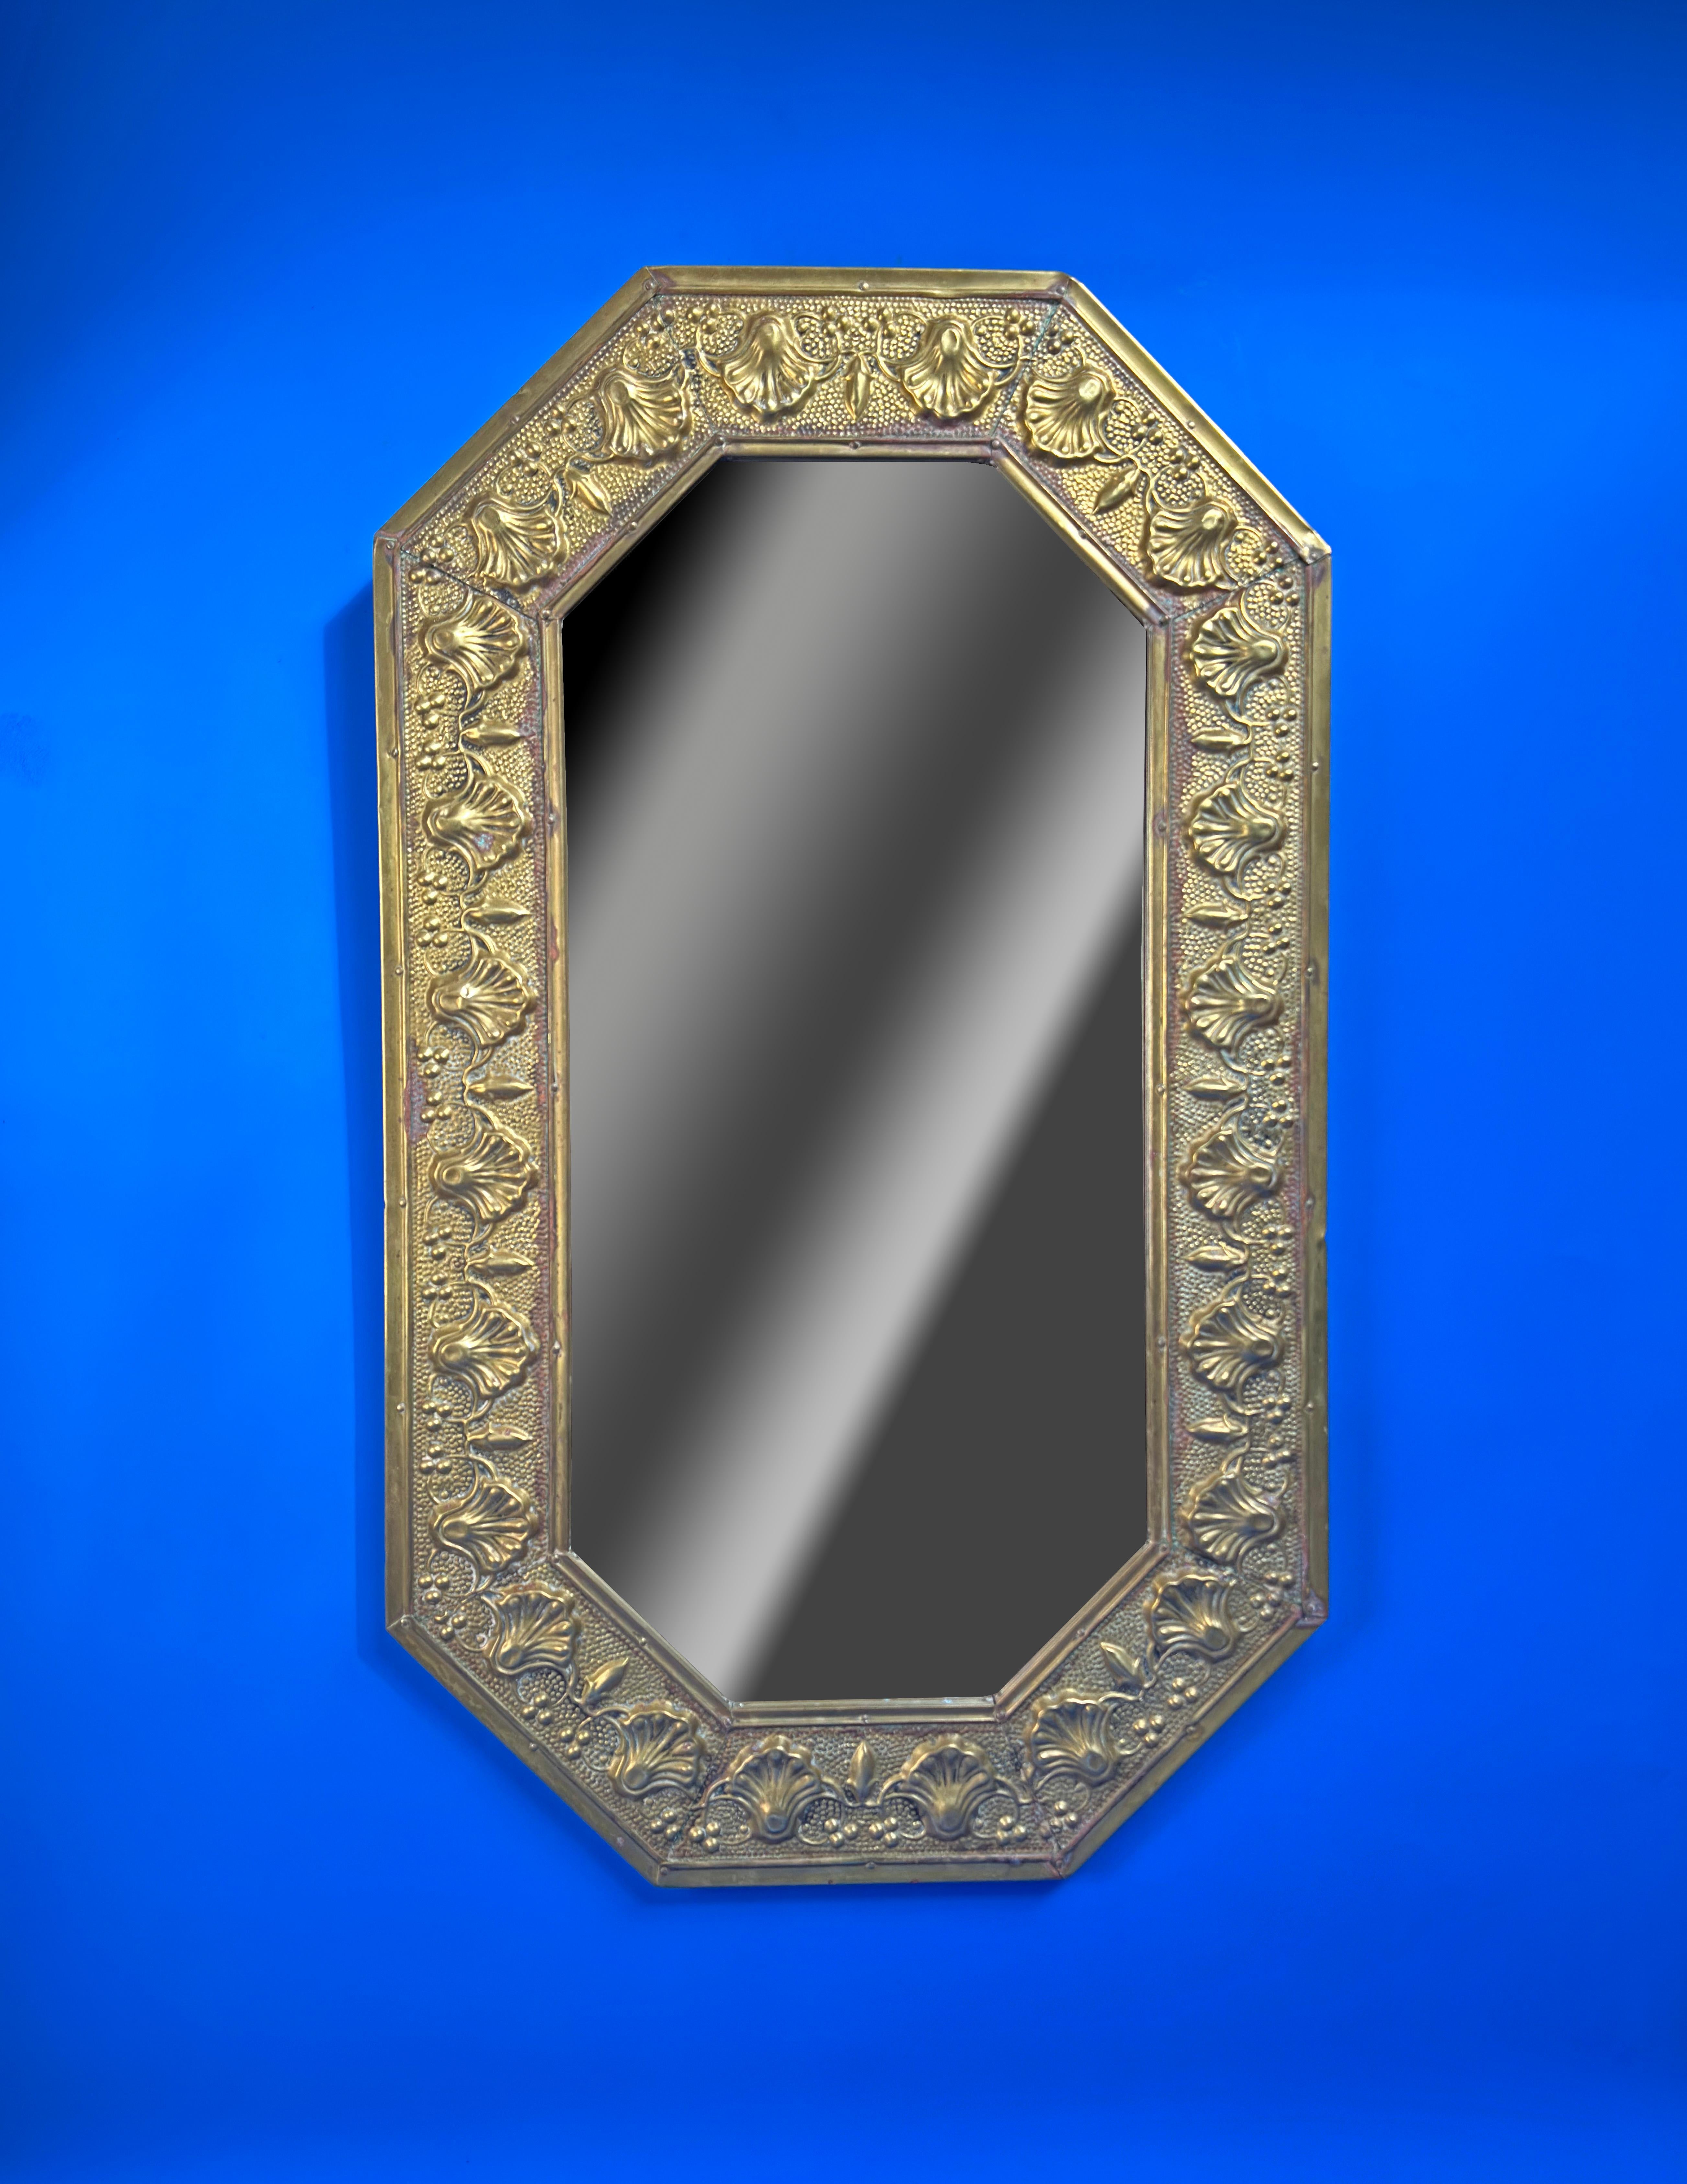 A beautiful arts and crafts mirror made in England around the 1920s. 

The octagonal mirror was created from sheet brass and then hammered using the repousse technique to create the decorative frame border. 

The mirror has been mounted on a